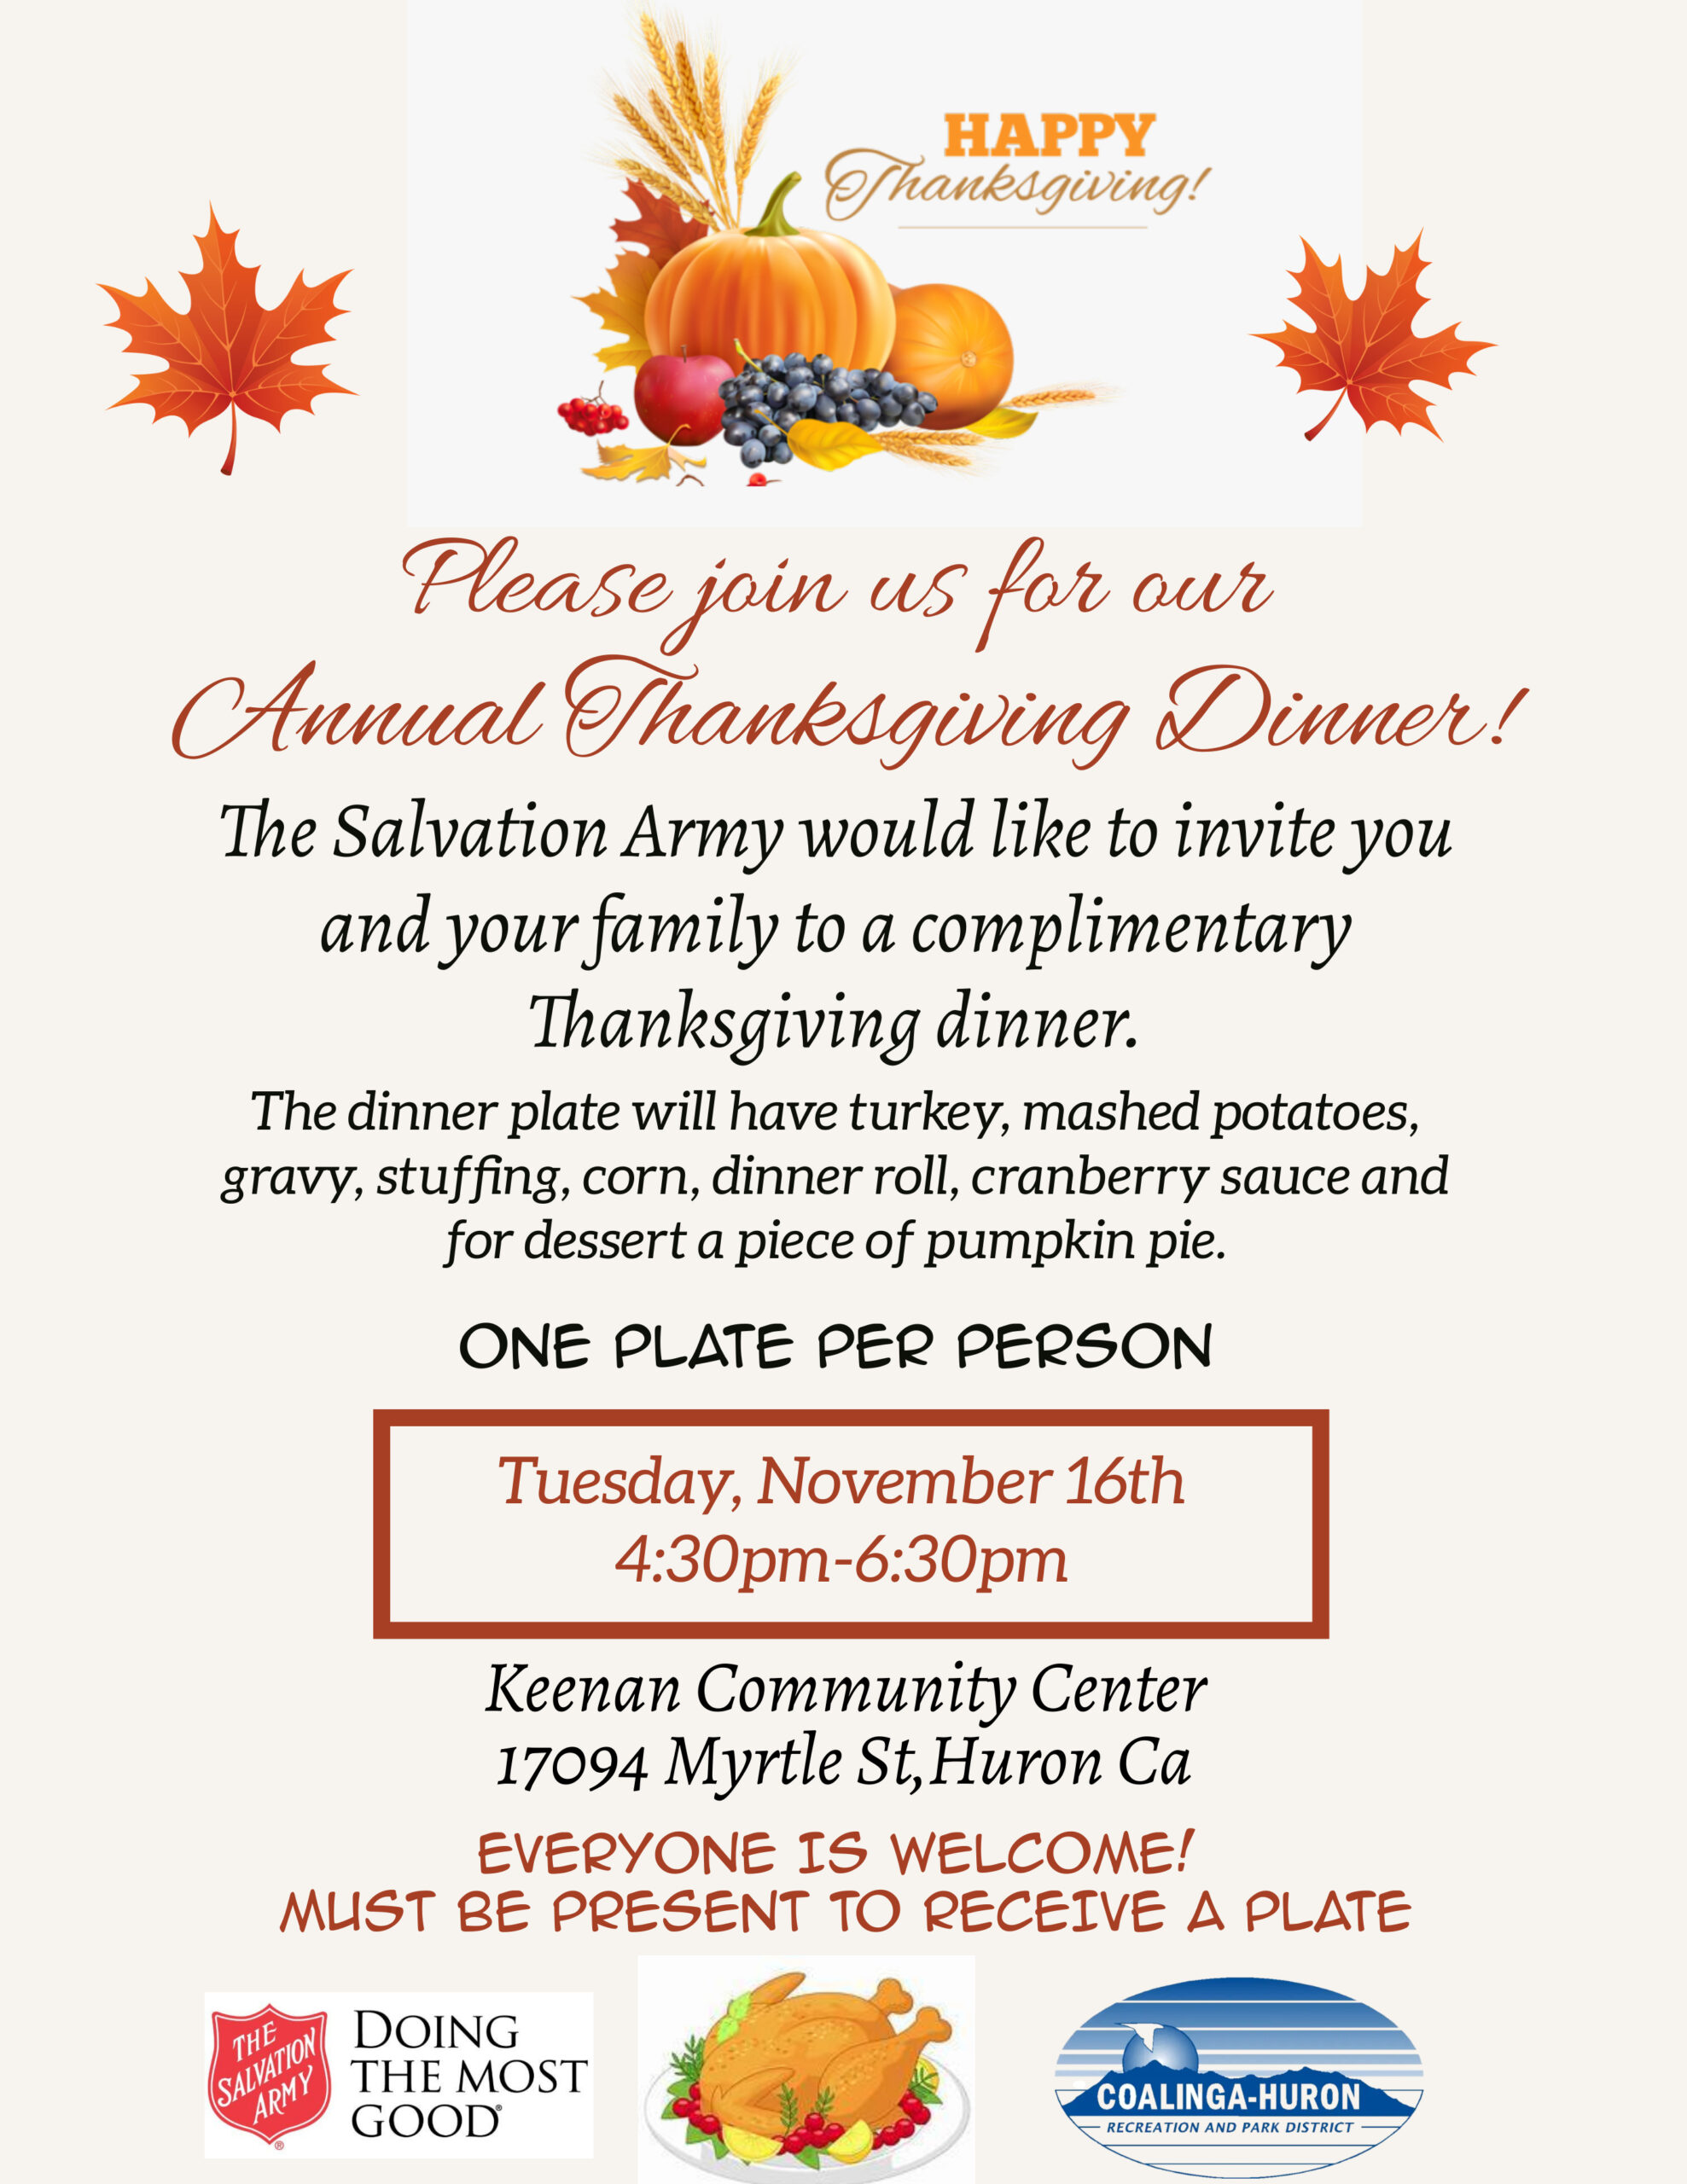 Huron Thanksgiving Dinner Sponsored by Salvation Army